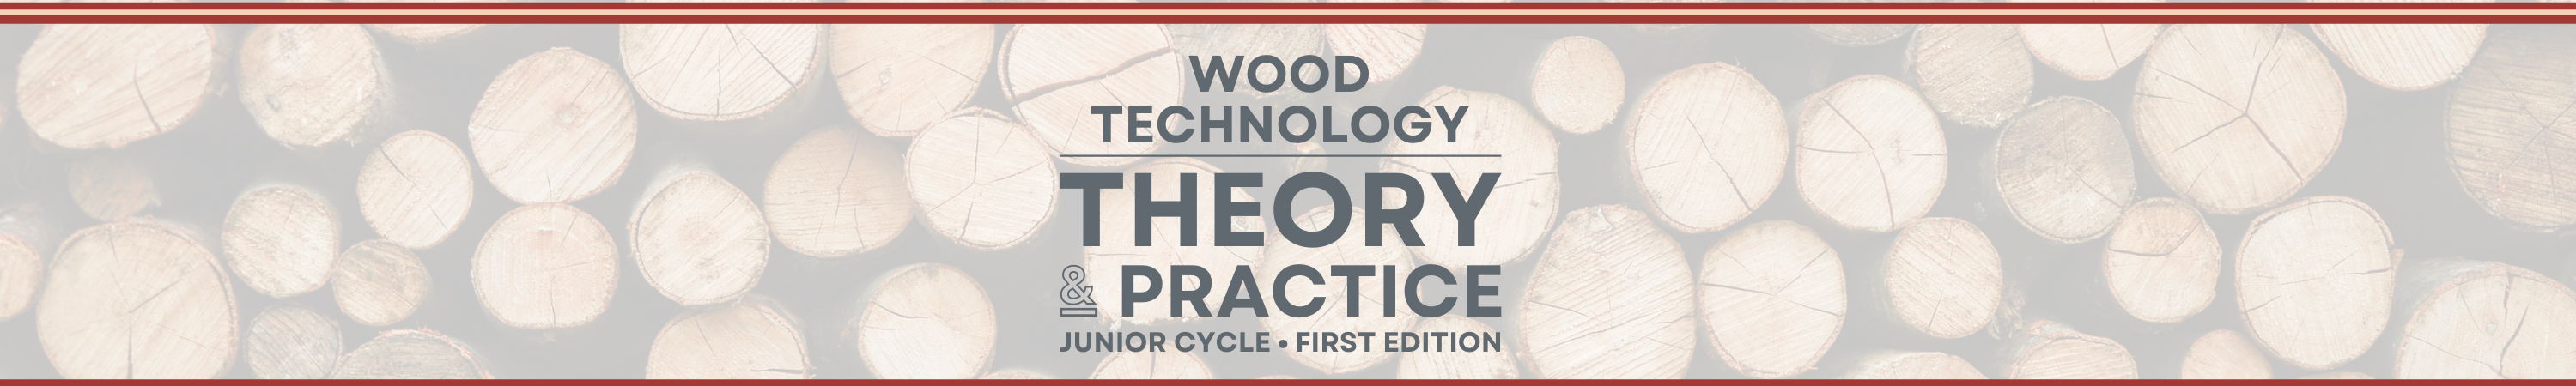 WOOD TECHNOLOGY BANNER-Student